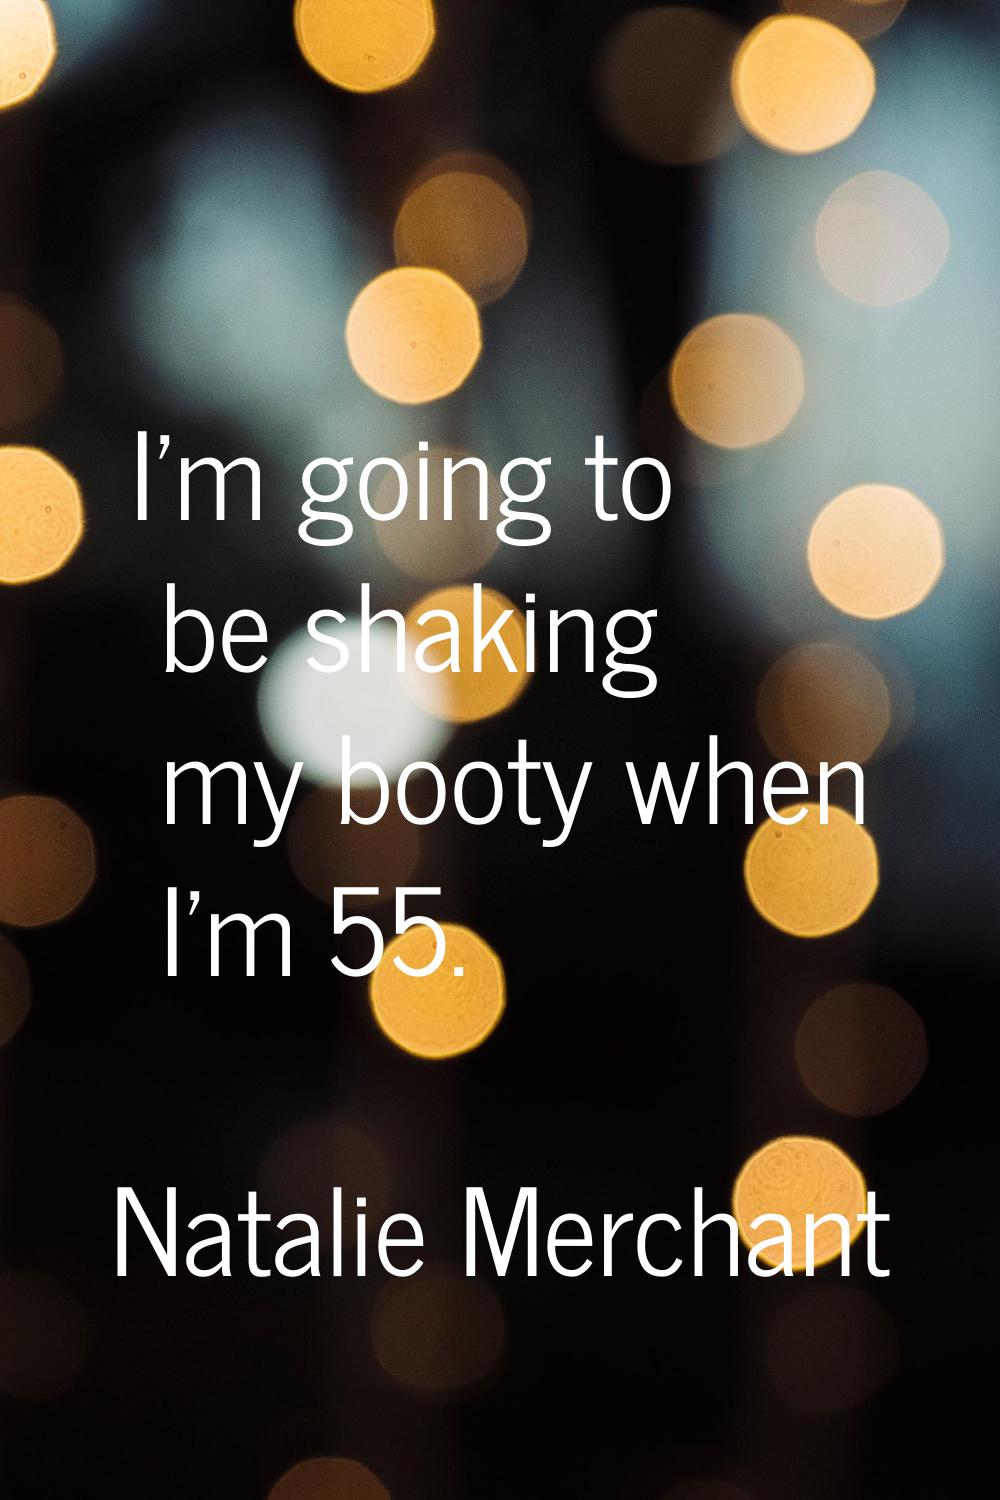 I'm going to be shaking my booty when I'm 55.